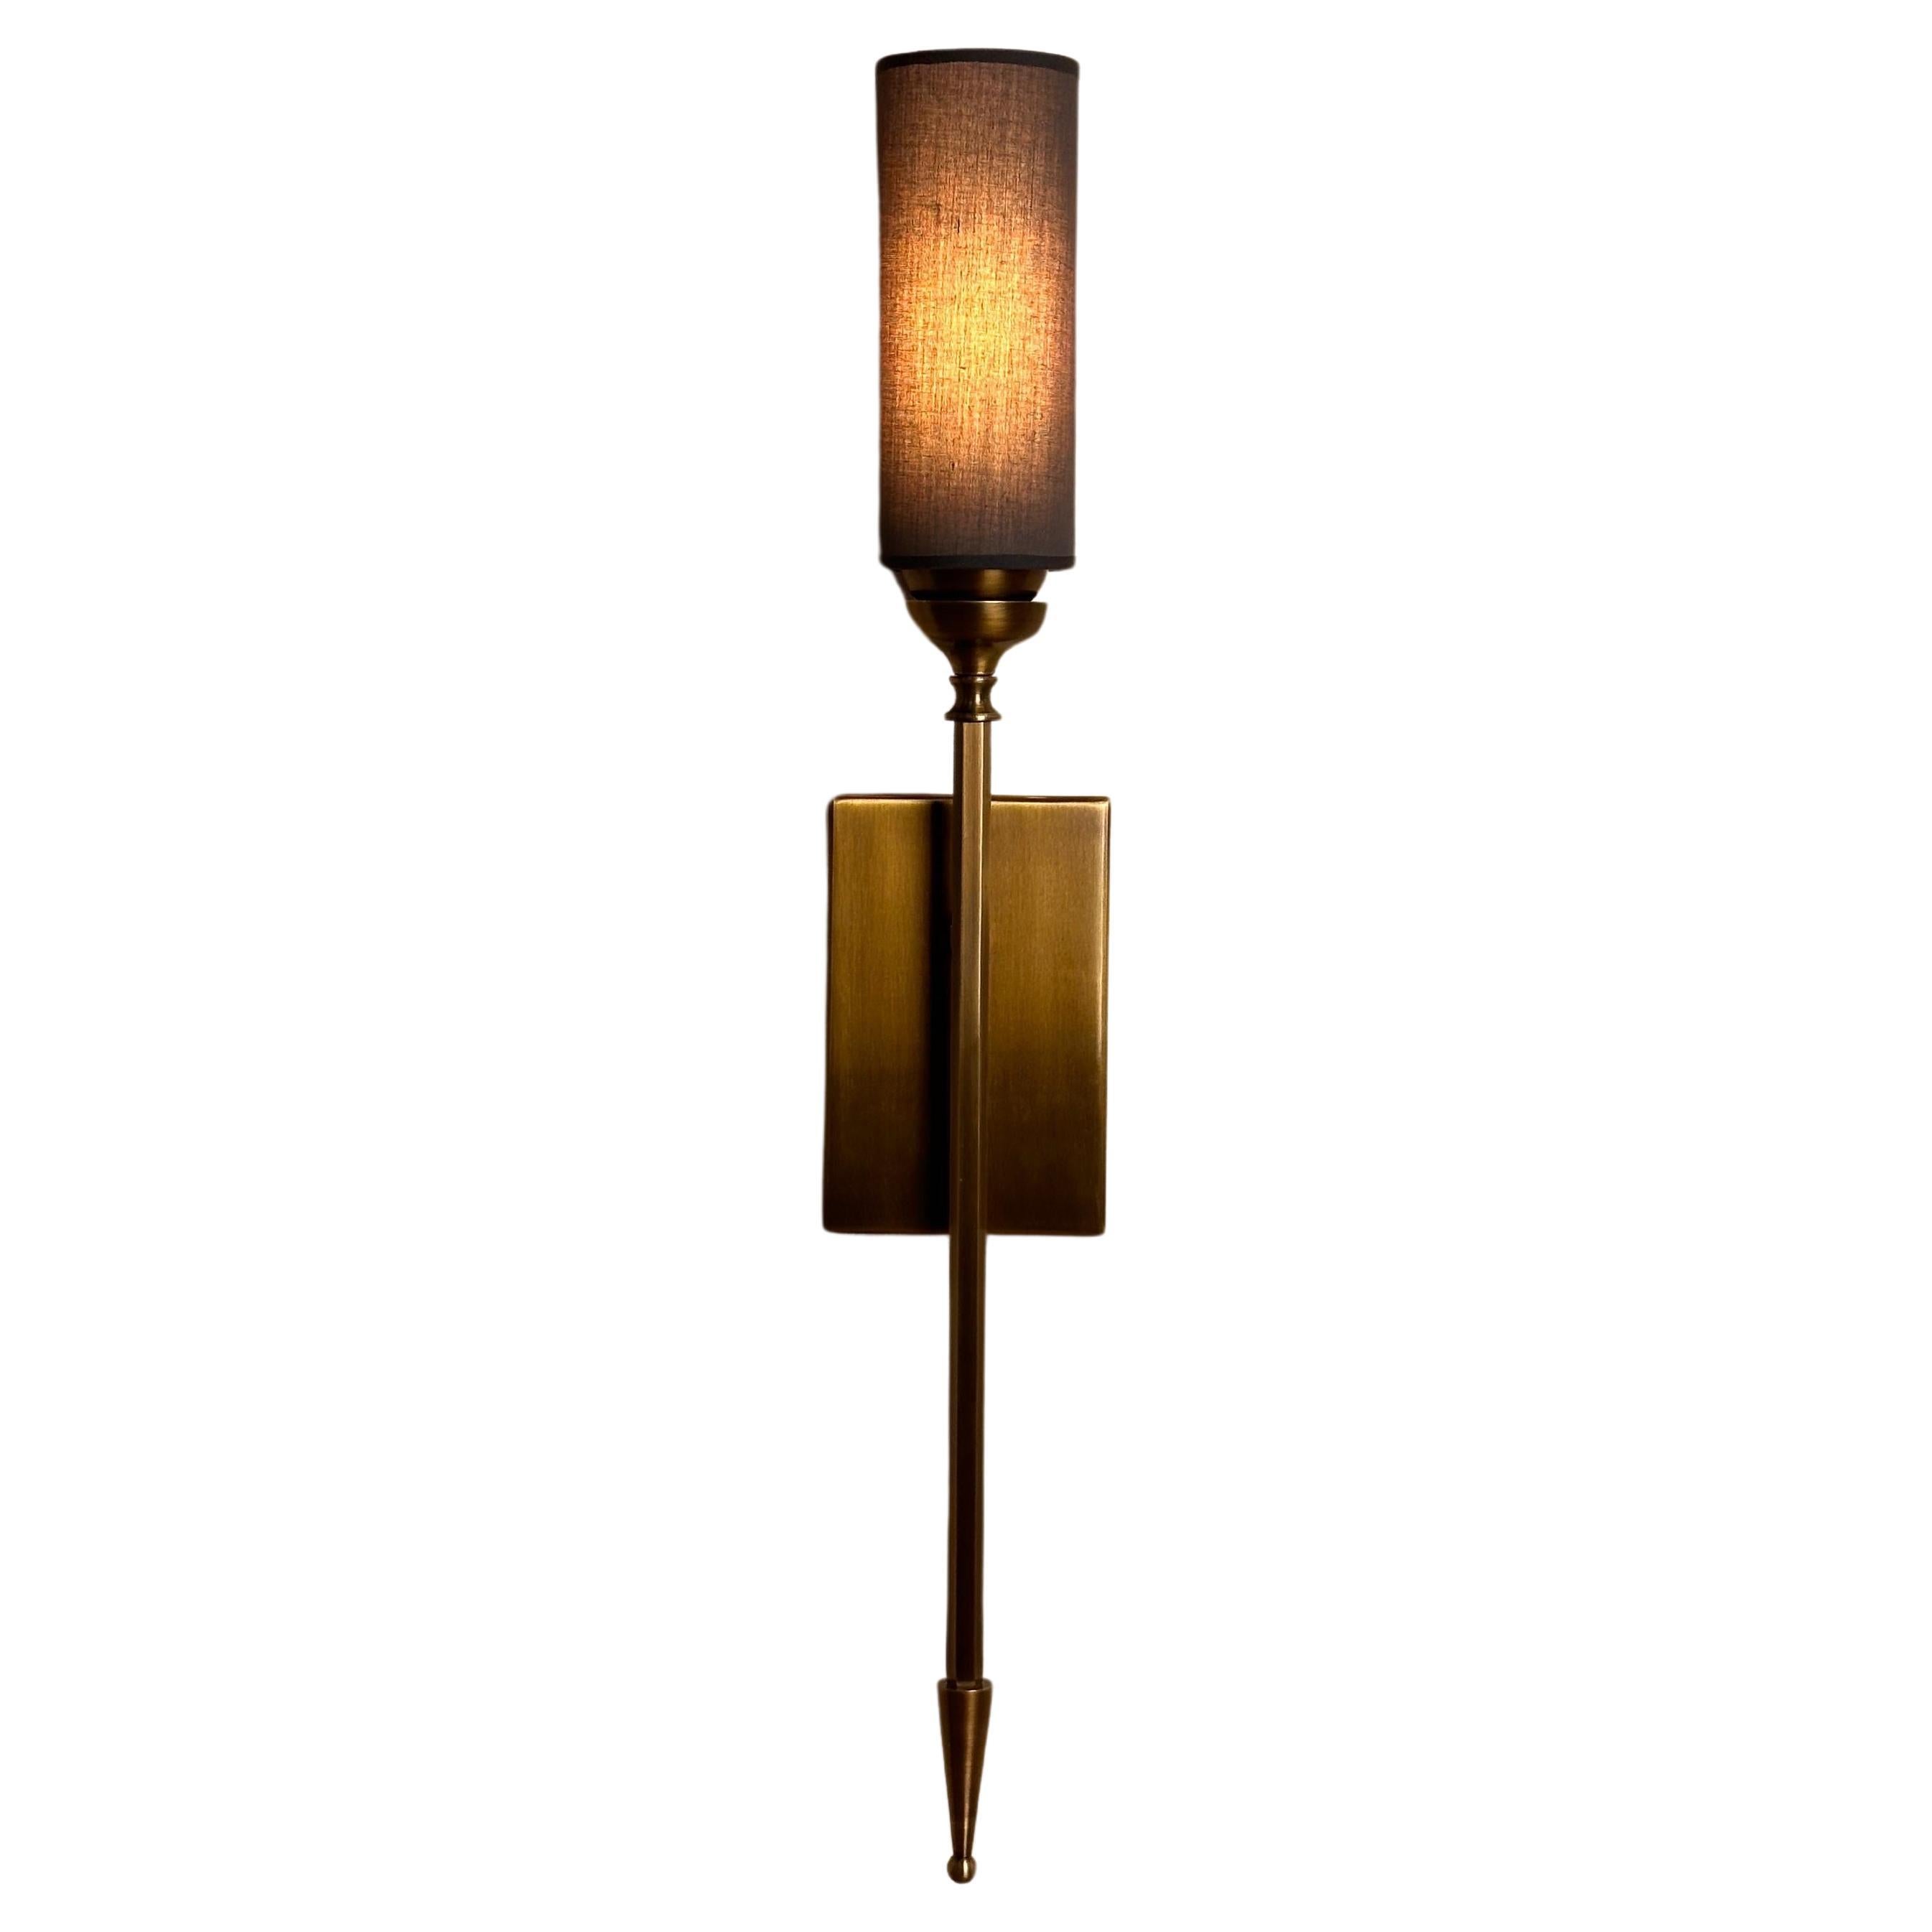 SAGOVIA Shade brass wall lighting is a stunning representation of Mid-Century Modern style, meticulously crafted to add a touch of elegance and sophistication to any space. This exceptional wall sconce is expertly designed, featuring a cylindrical